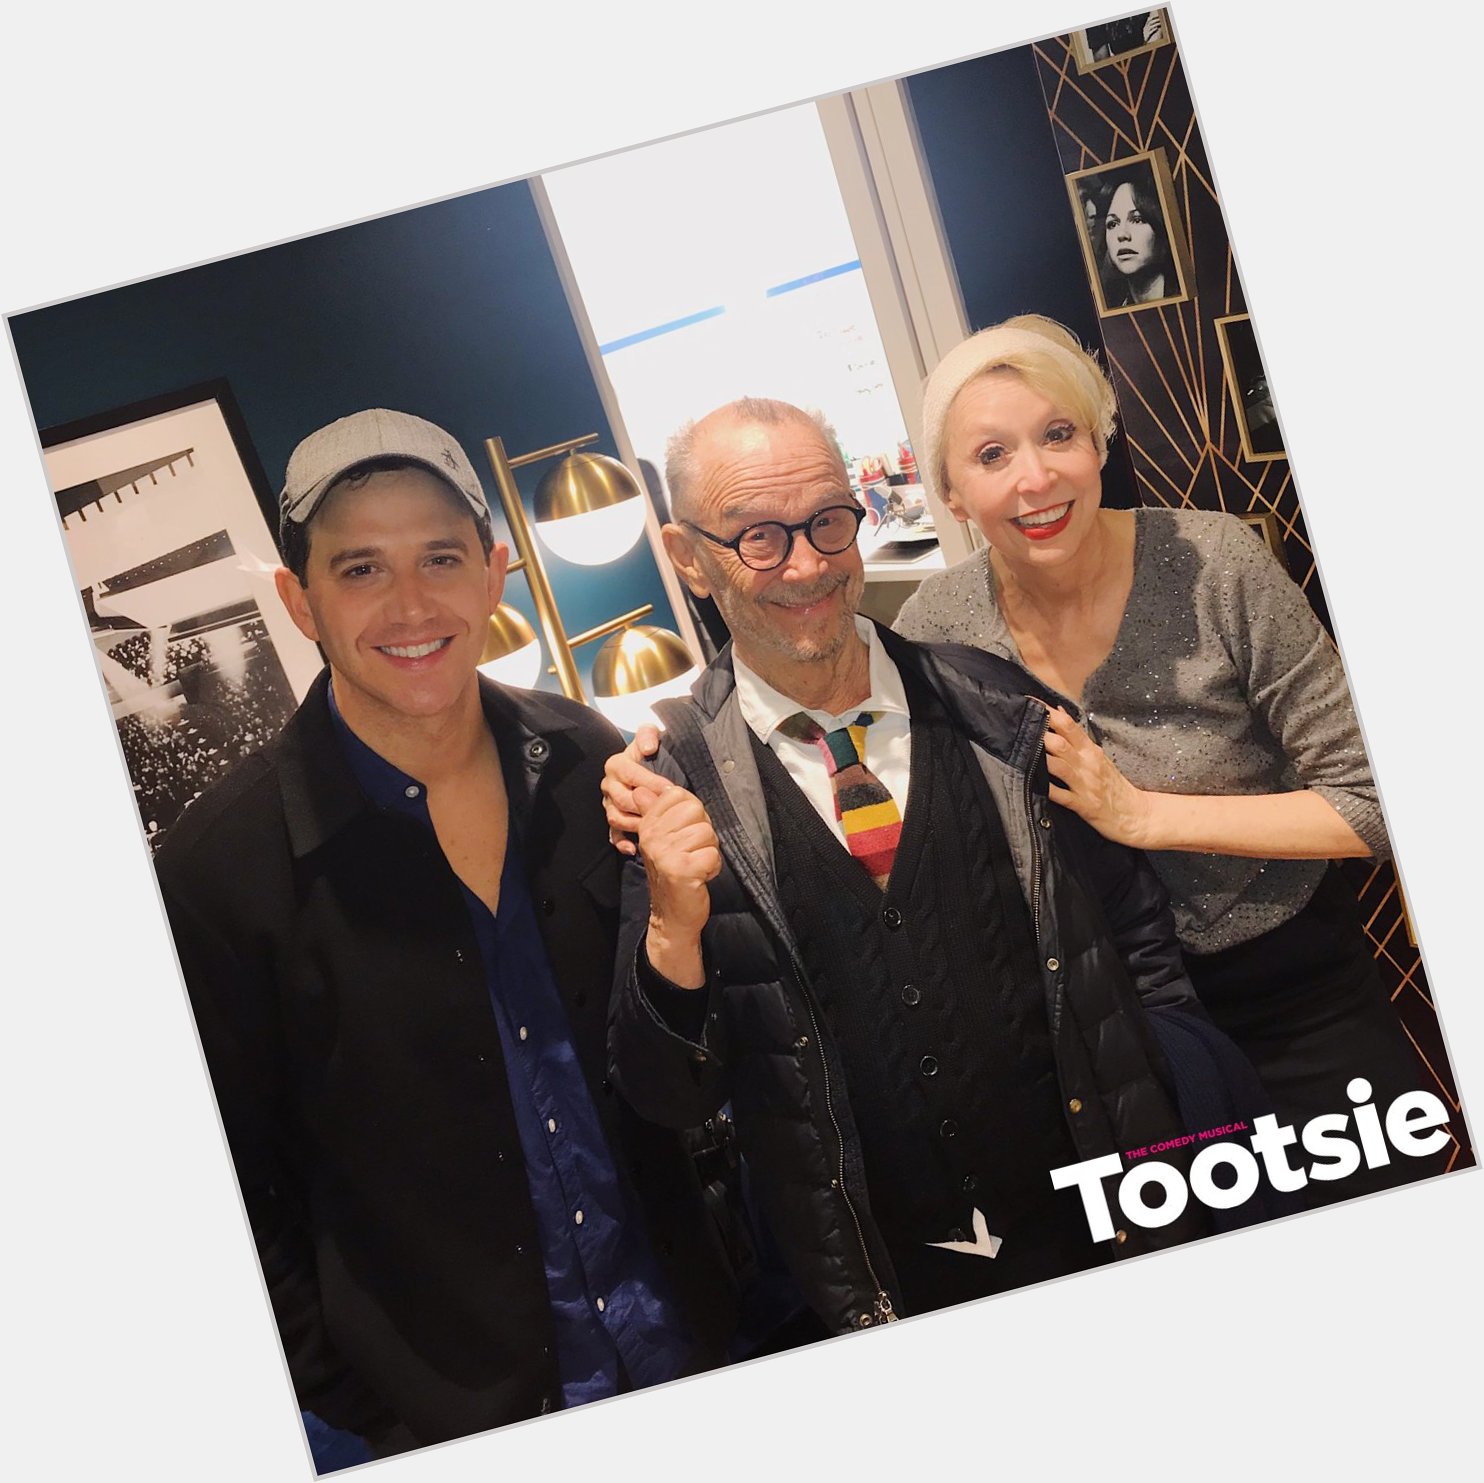 Willkommen, Bienvenue, and Happy Birthday to Joel Grey! Thank you for stopping by last night.  